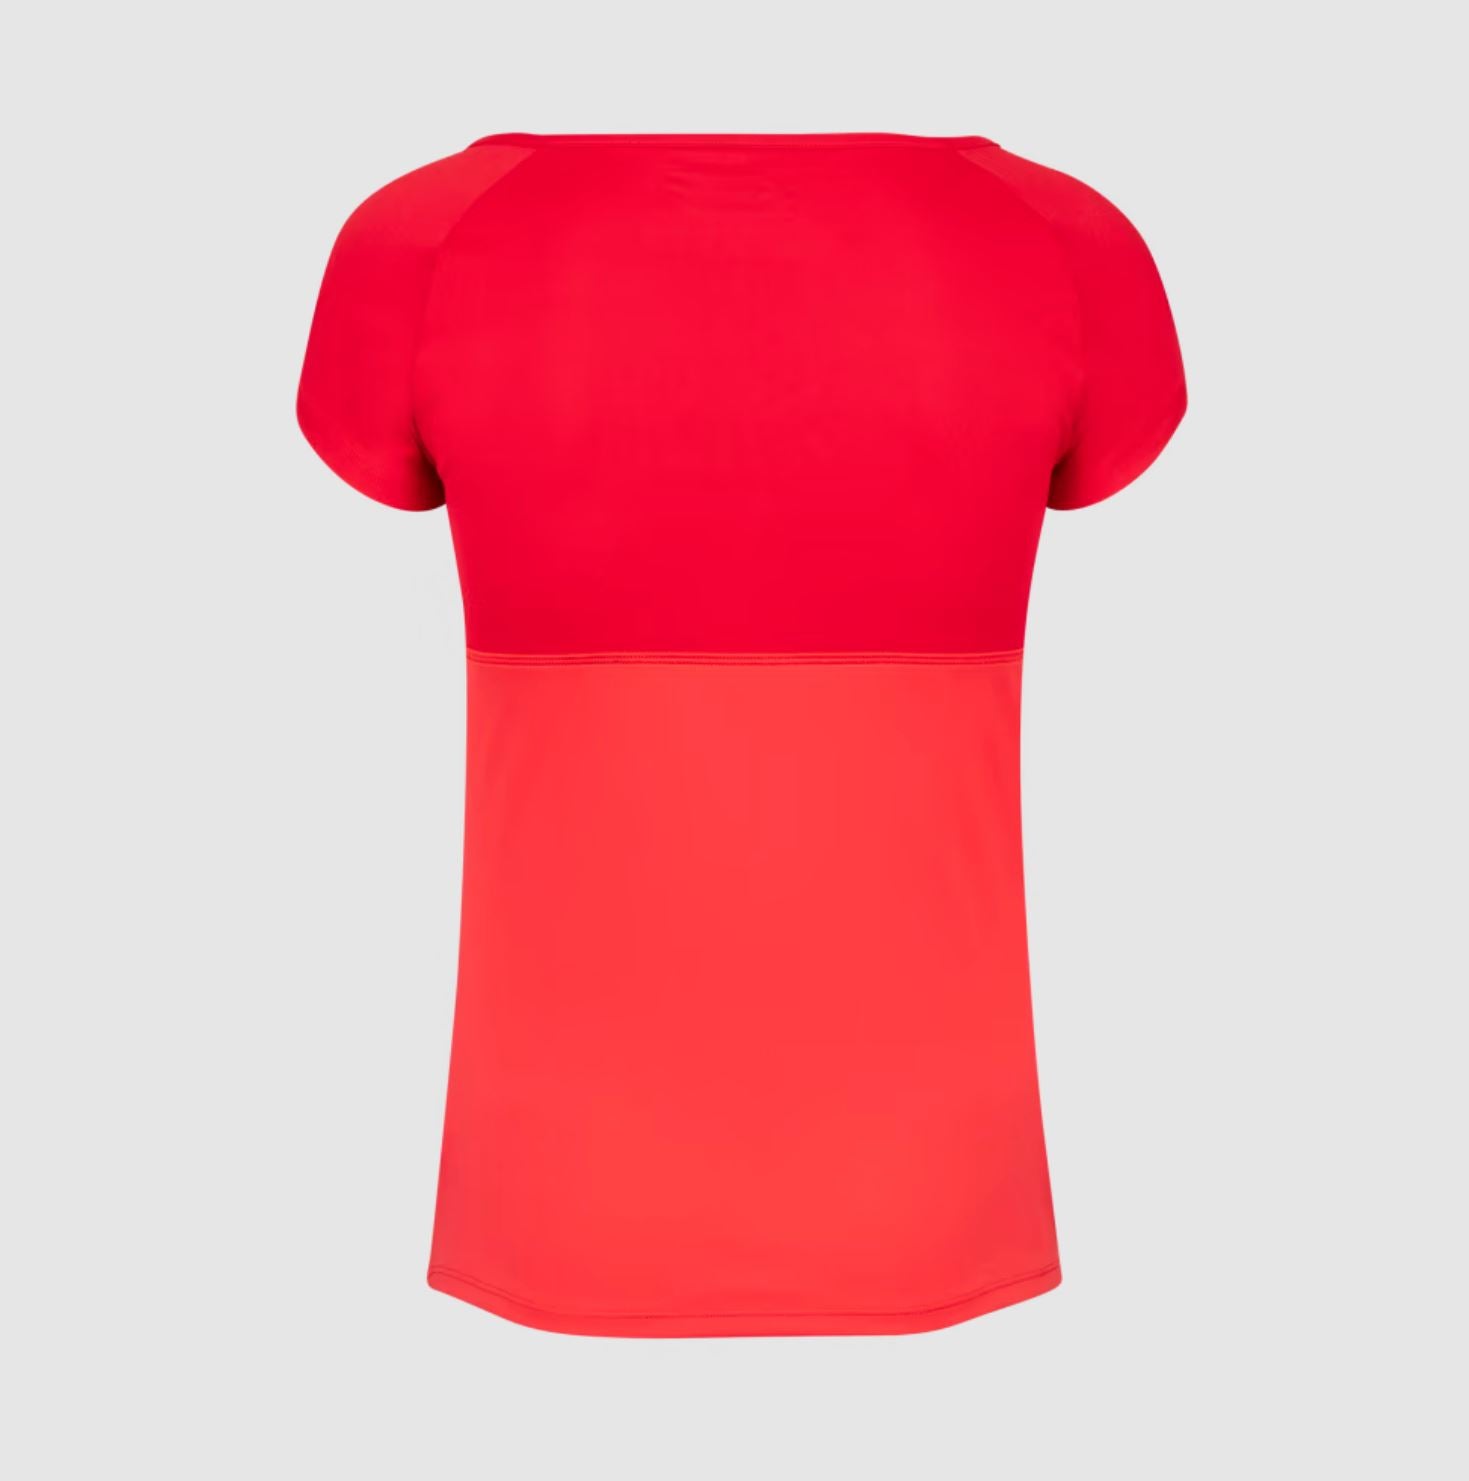 Babolat Play Cap Sleeve Women's Top (Red)